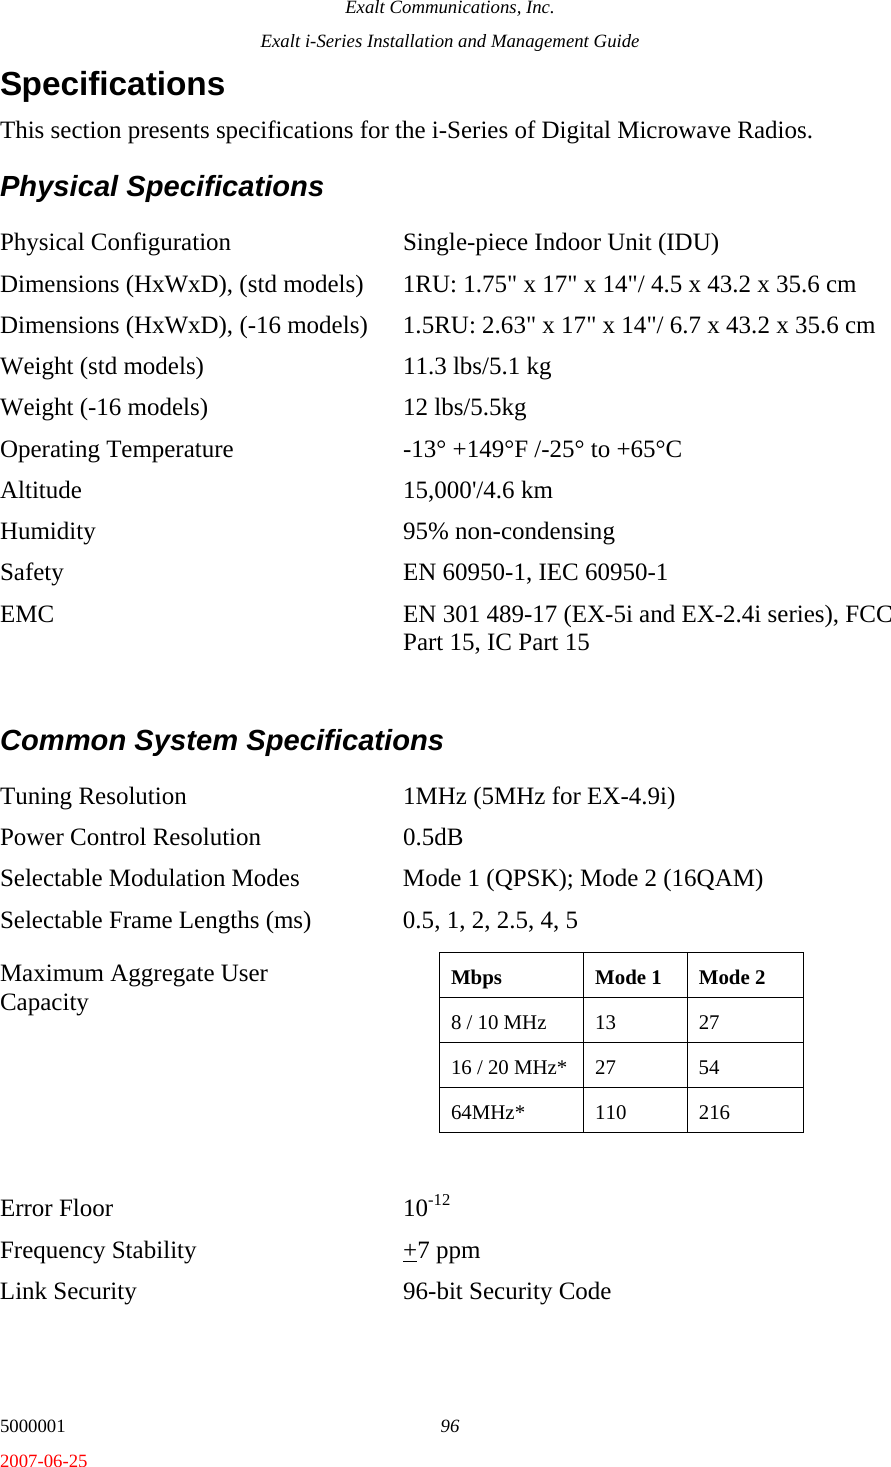 Exalt Communications, Inc. Exalt i-Series Installation and Management Guide 5000001  96 2007-06-25 Specifications This section presents specifications for the i-Series of Digital Microwave Radios. Physical Specifications Physical Configuration  Single-piece Indoor Unit (IDU) Dimensions (HxWxD), (std models)  1RU: 1.75&quot; x 17&quot; x 14&quot;/ 4.5 x 43.2 x 35.6 cm Dimensions (HxWxD), (-16 models)  1.5RU: 2.63&quot; x 17&quot; x 14&quot;/ 6.7 x 43.2 x 35.6 cm Weight (std models)  11.3 lbs/5.1 kg Weight (-16 models)  12 lbs/5.5kg Operating Temperature  -13° +149°F /-25° to +65°C Altitude 15,000&apos;/4.6 km  Humidity 95% non-condensing Safety  EN 60950-1, IEC 60950-1 EMC  EN 301 489-17 (EX-5i and EX-2.4i series), FCC   Part 15, IC Part 15  Common System Specifications Tuning Resolution  1MHz (5MHz for EX-4.9i) Power Control Resolution  0.5dB Selectable Modulation Modes  Mode 1 (QPSK); Mode 2 (16QAM) Selectable Frame Lengths (ms)  0.5, 1, 2, 2.5, 4, 5 Maximum Aggregate User Capacity      Error Floor  10-12 Frequency Stability  +7 ppm Link Security  96-bit Security Code Mbps  Mode 1  Mode 2 8 / 10 MHz  13  27 16 / 20 MHz*  27  54 64MHz* 110 216 